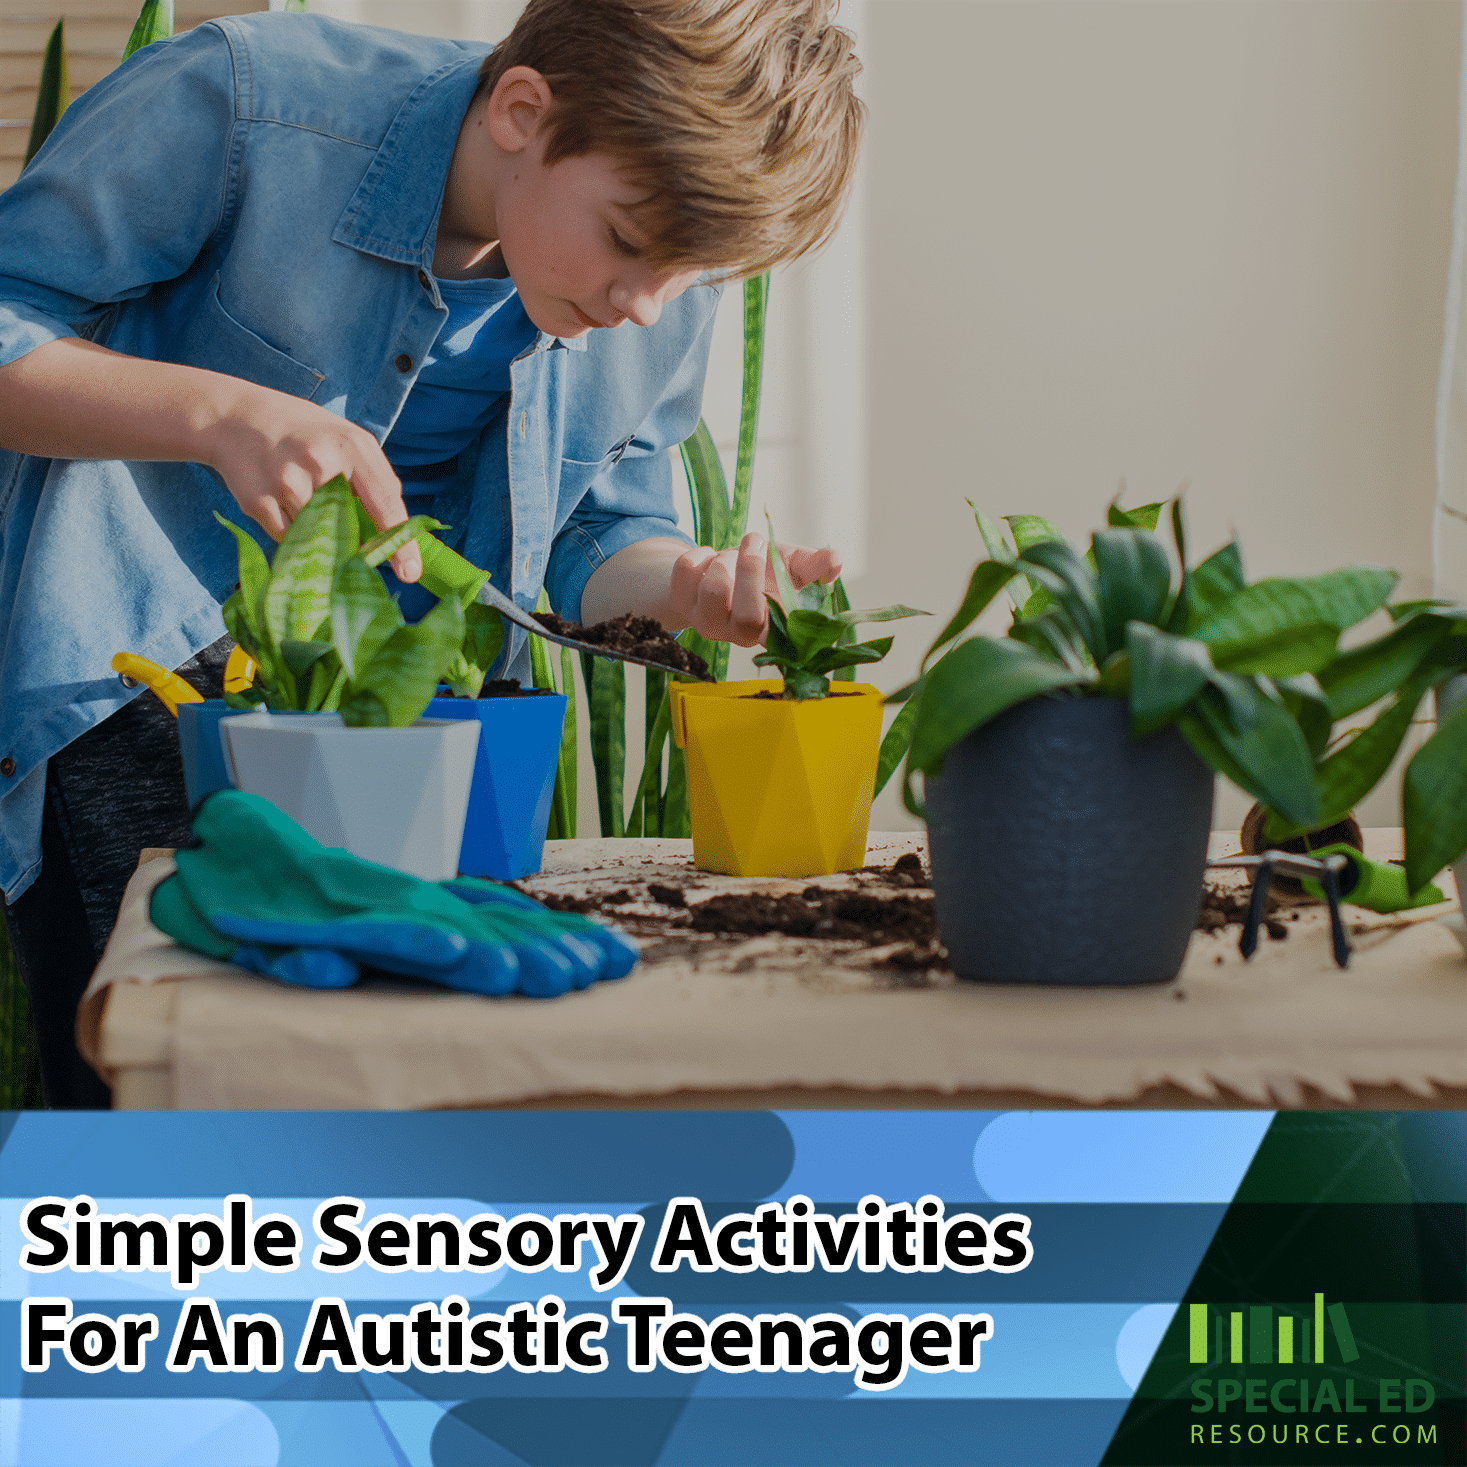 Teen boy with autism taking care of potted plants one of the many simple sensory activities for an autistic teenager.